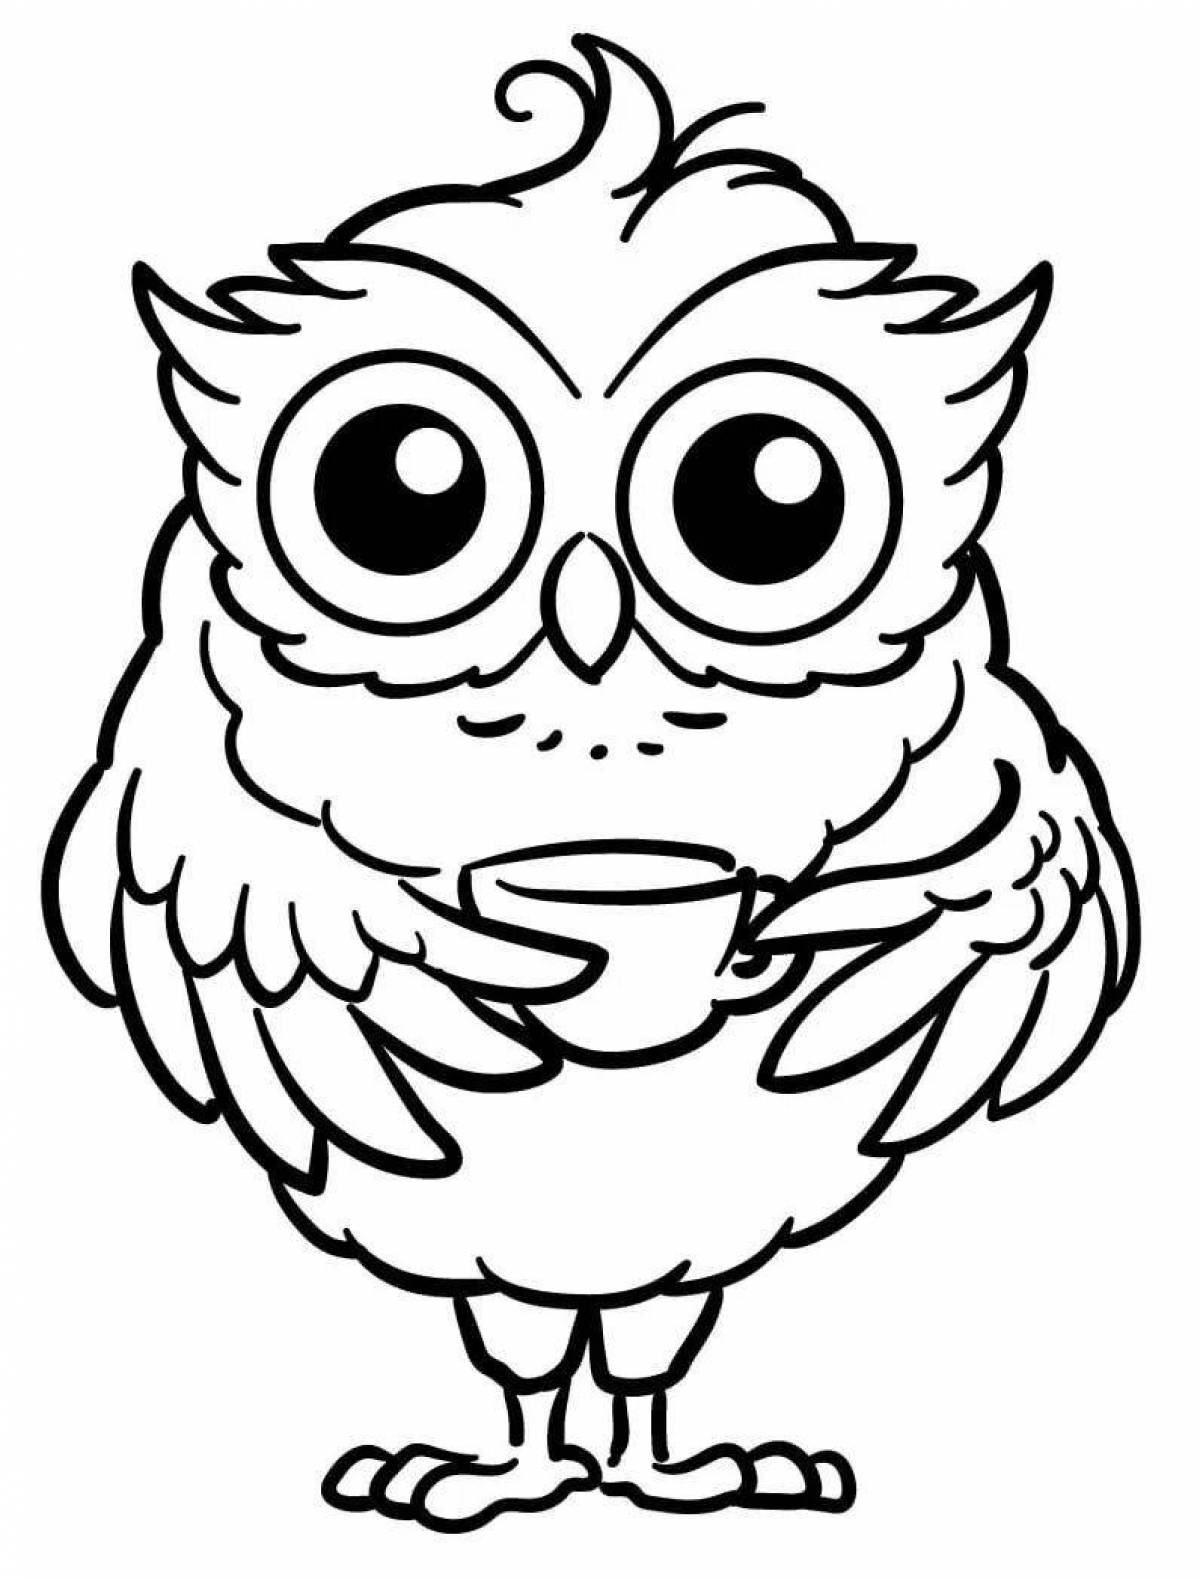 Creative owl coloring book for 3-4 year olds